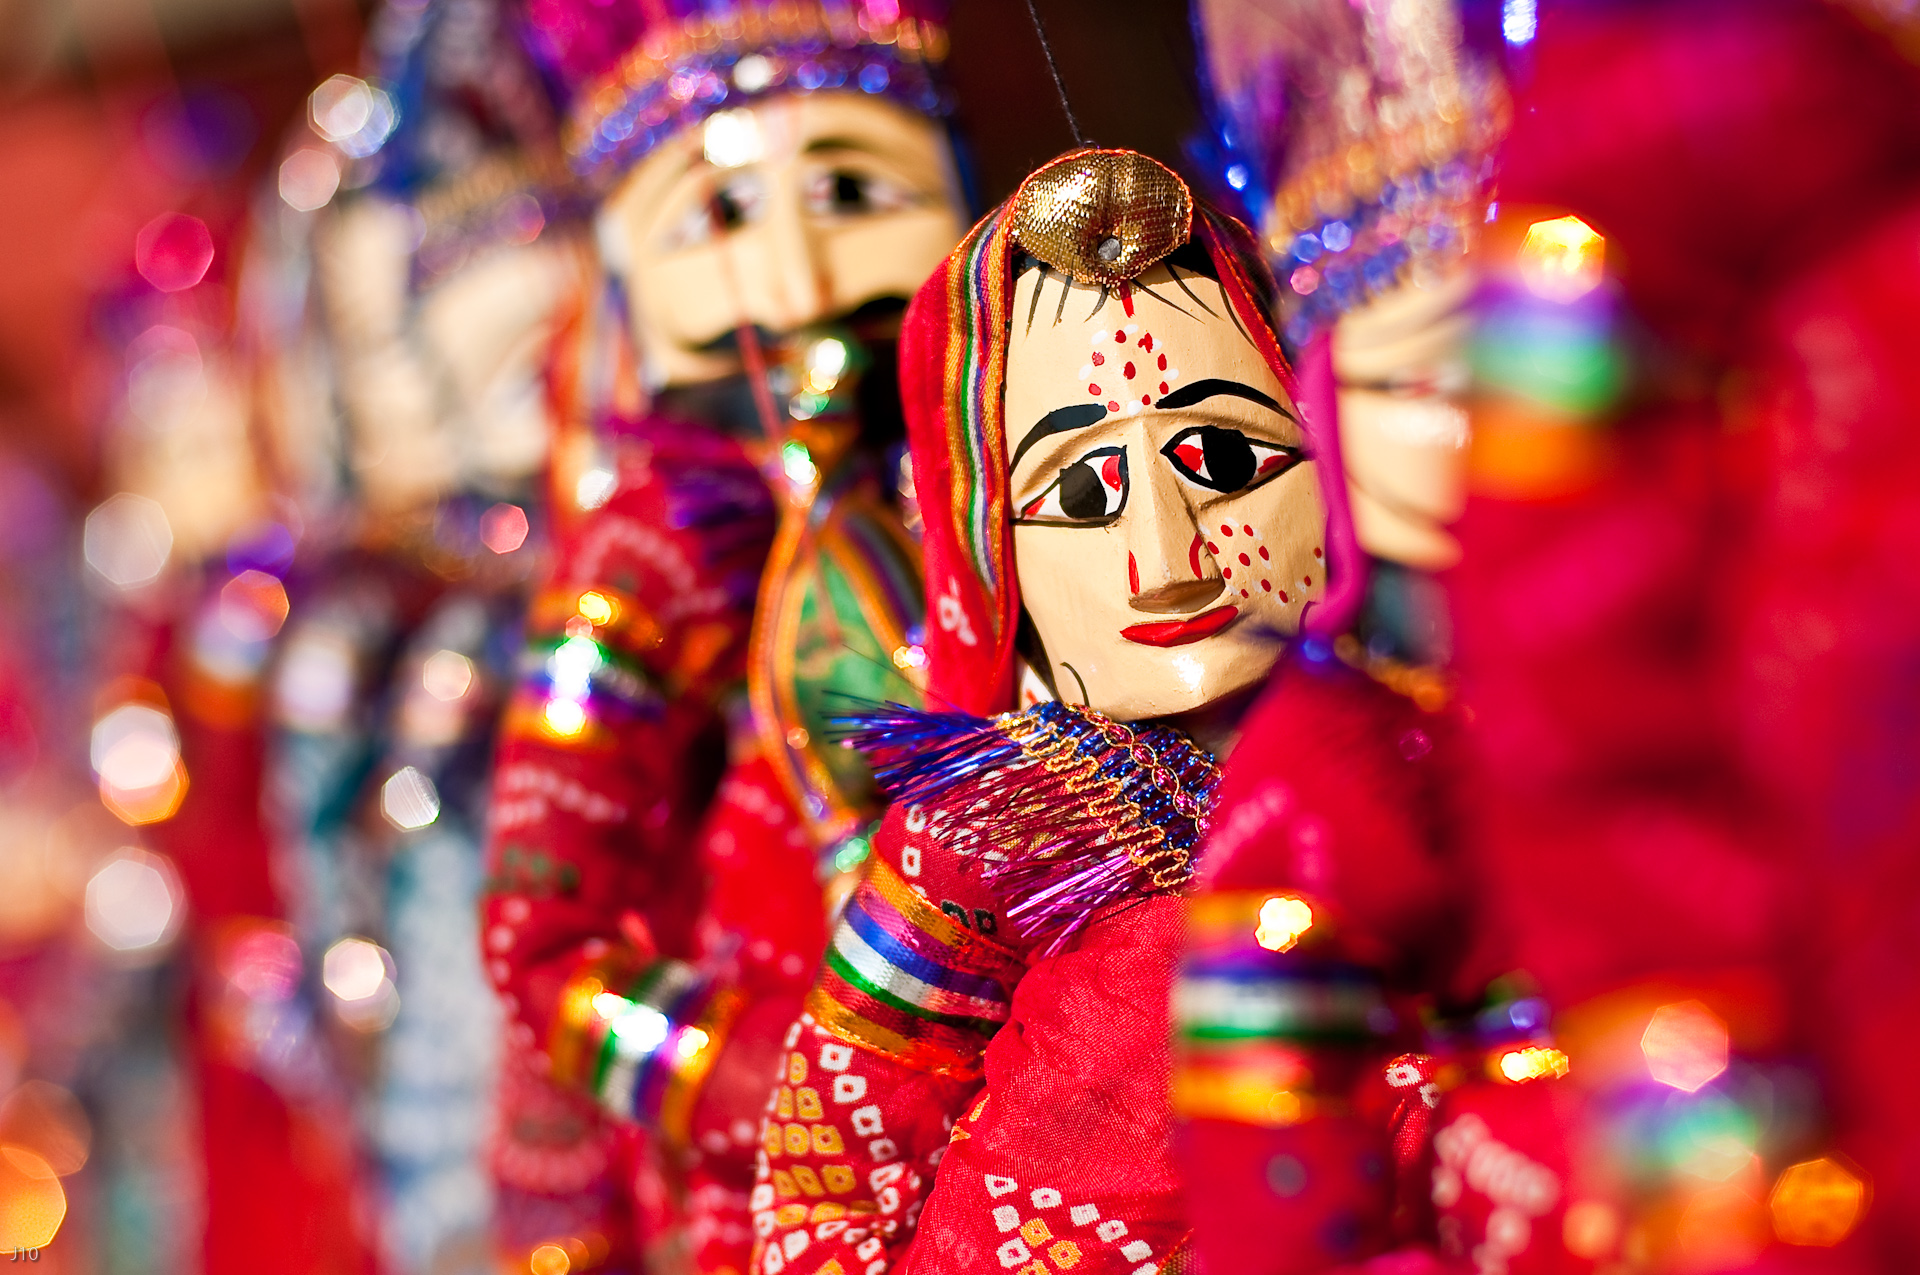 Rajasthan Puppet Shows Organisers, Top Rated Kathputli Puppet Players